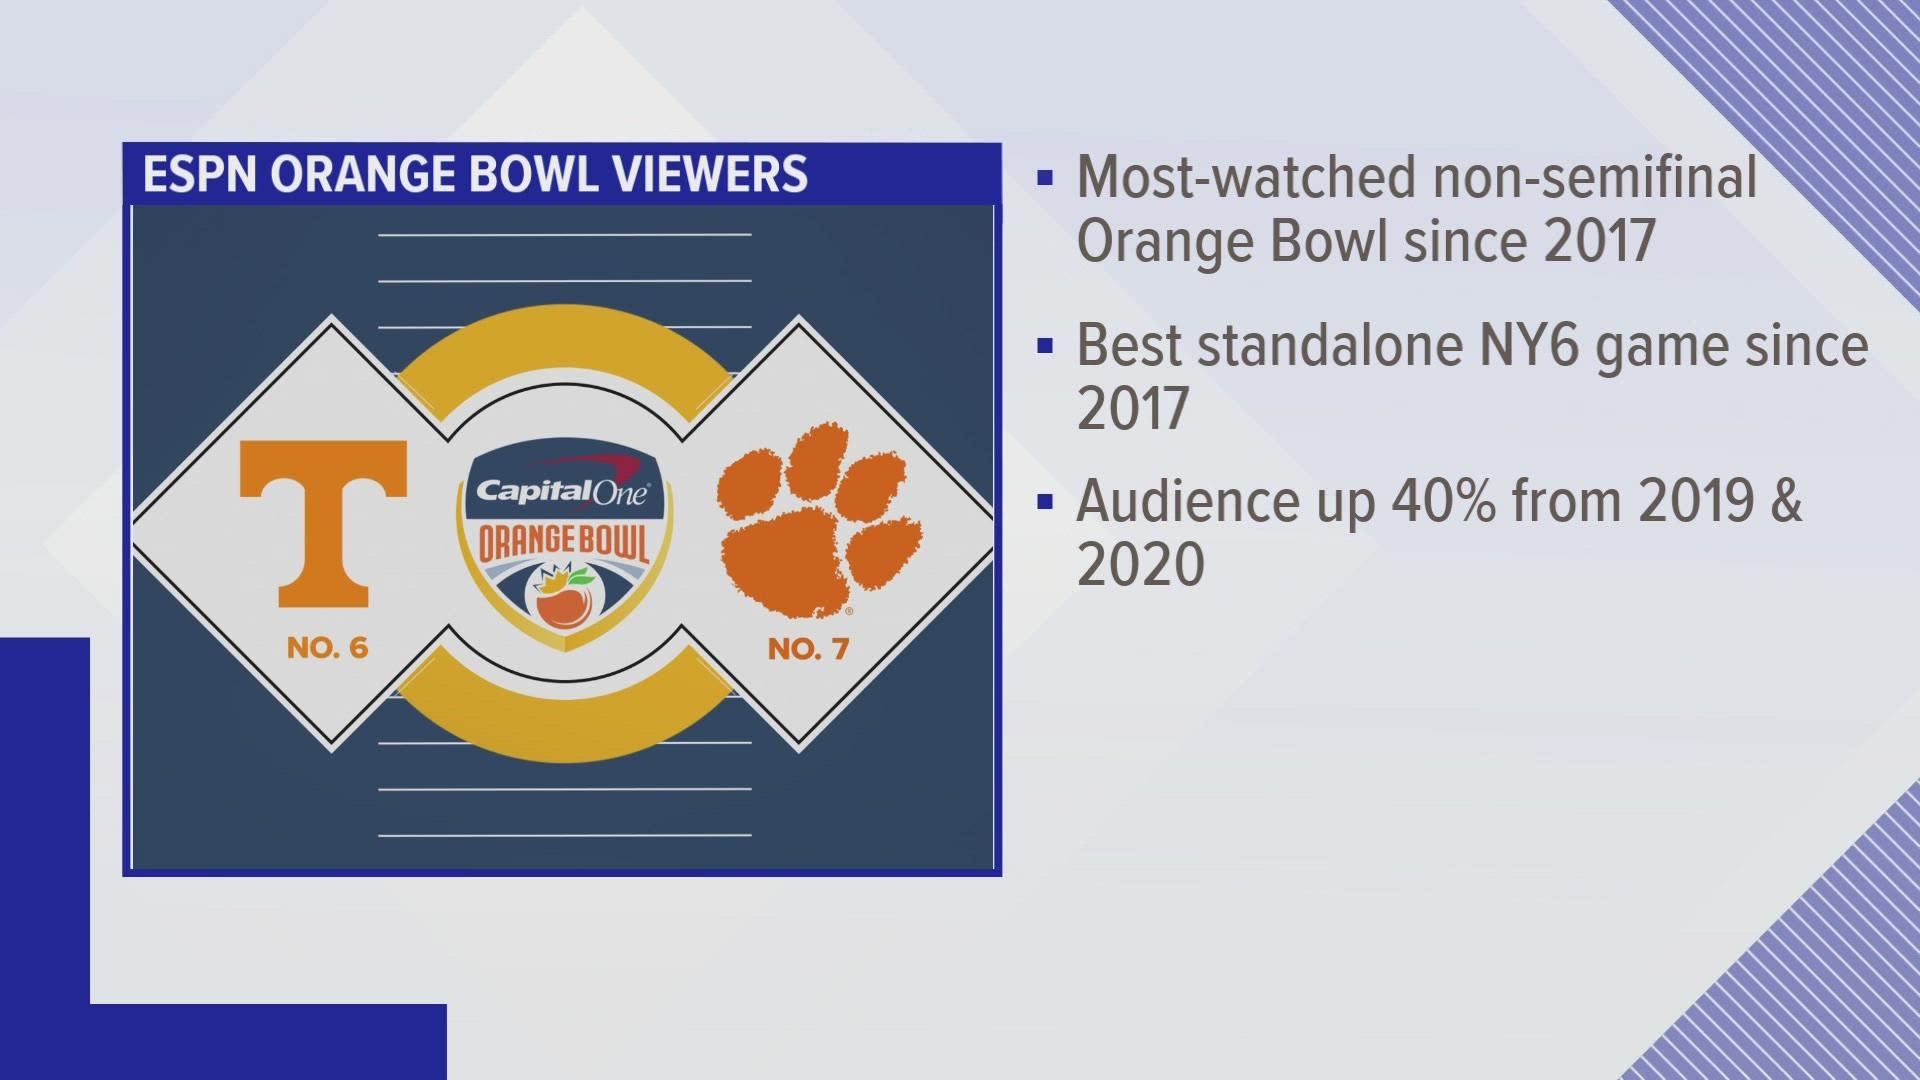 Friday marked a big win for the Vols and a lot of people tuned in to watch. ESPN said 8.6 million people watched the Orange Bowl.